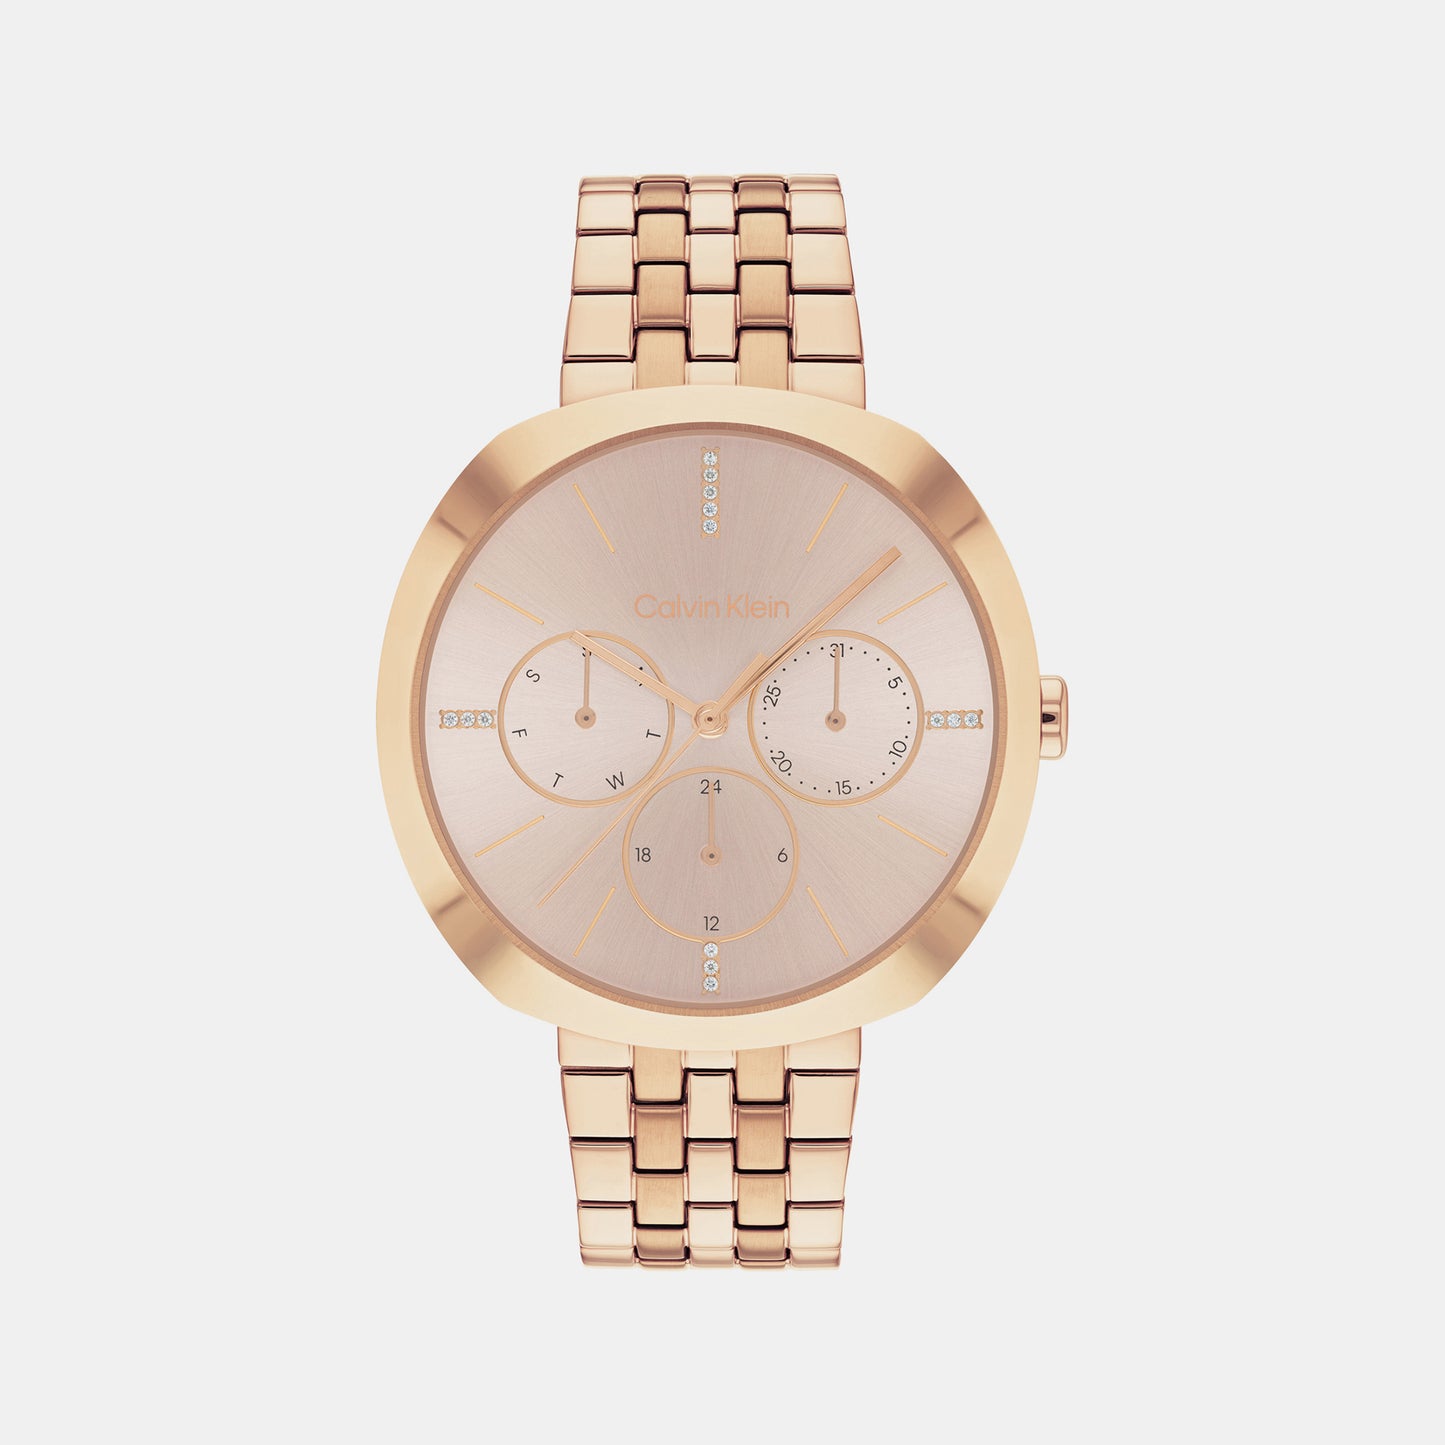 Shape Female Gold Chronograph Stainless Steel Watch 25200419